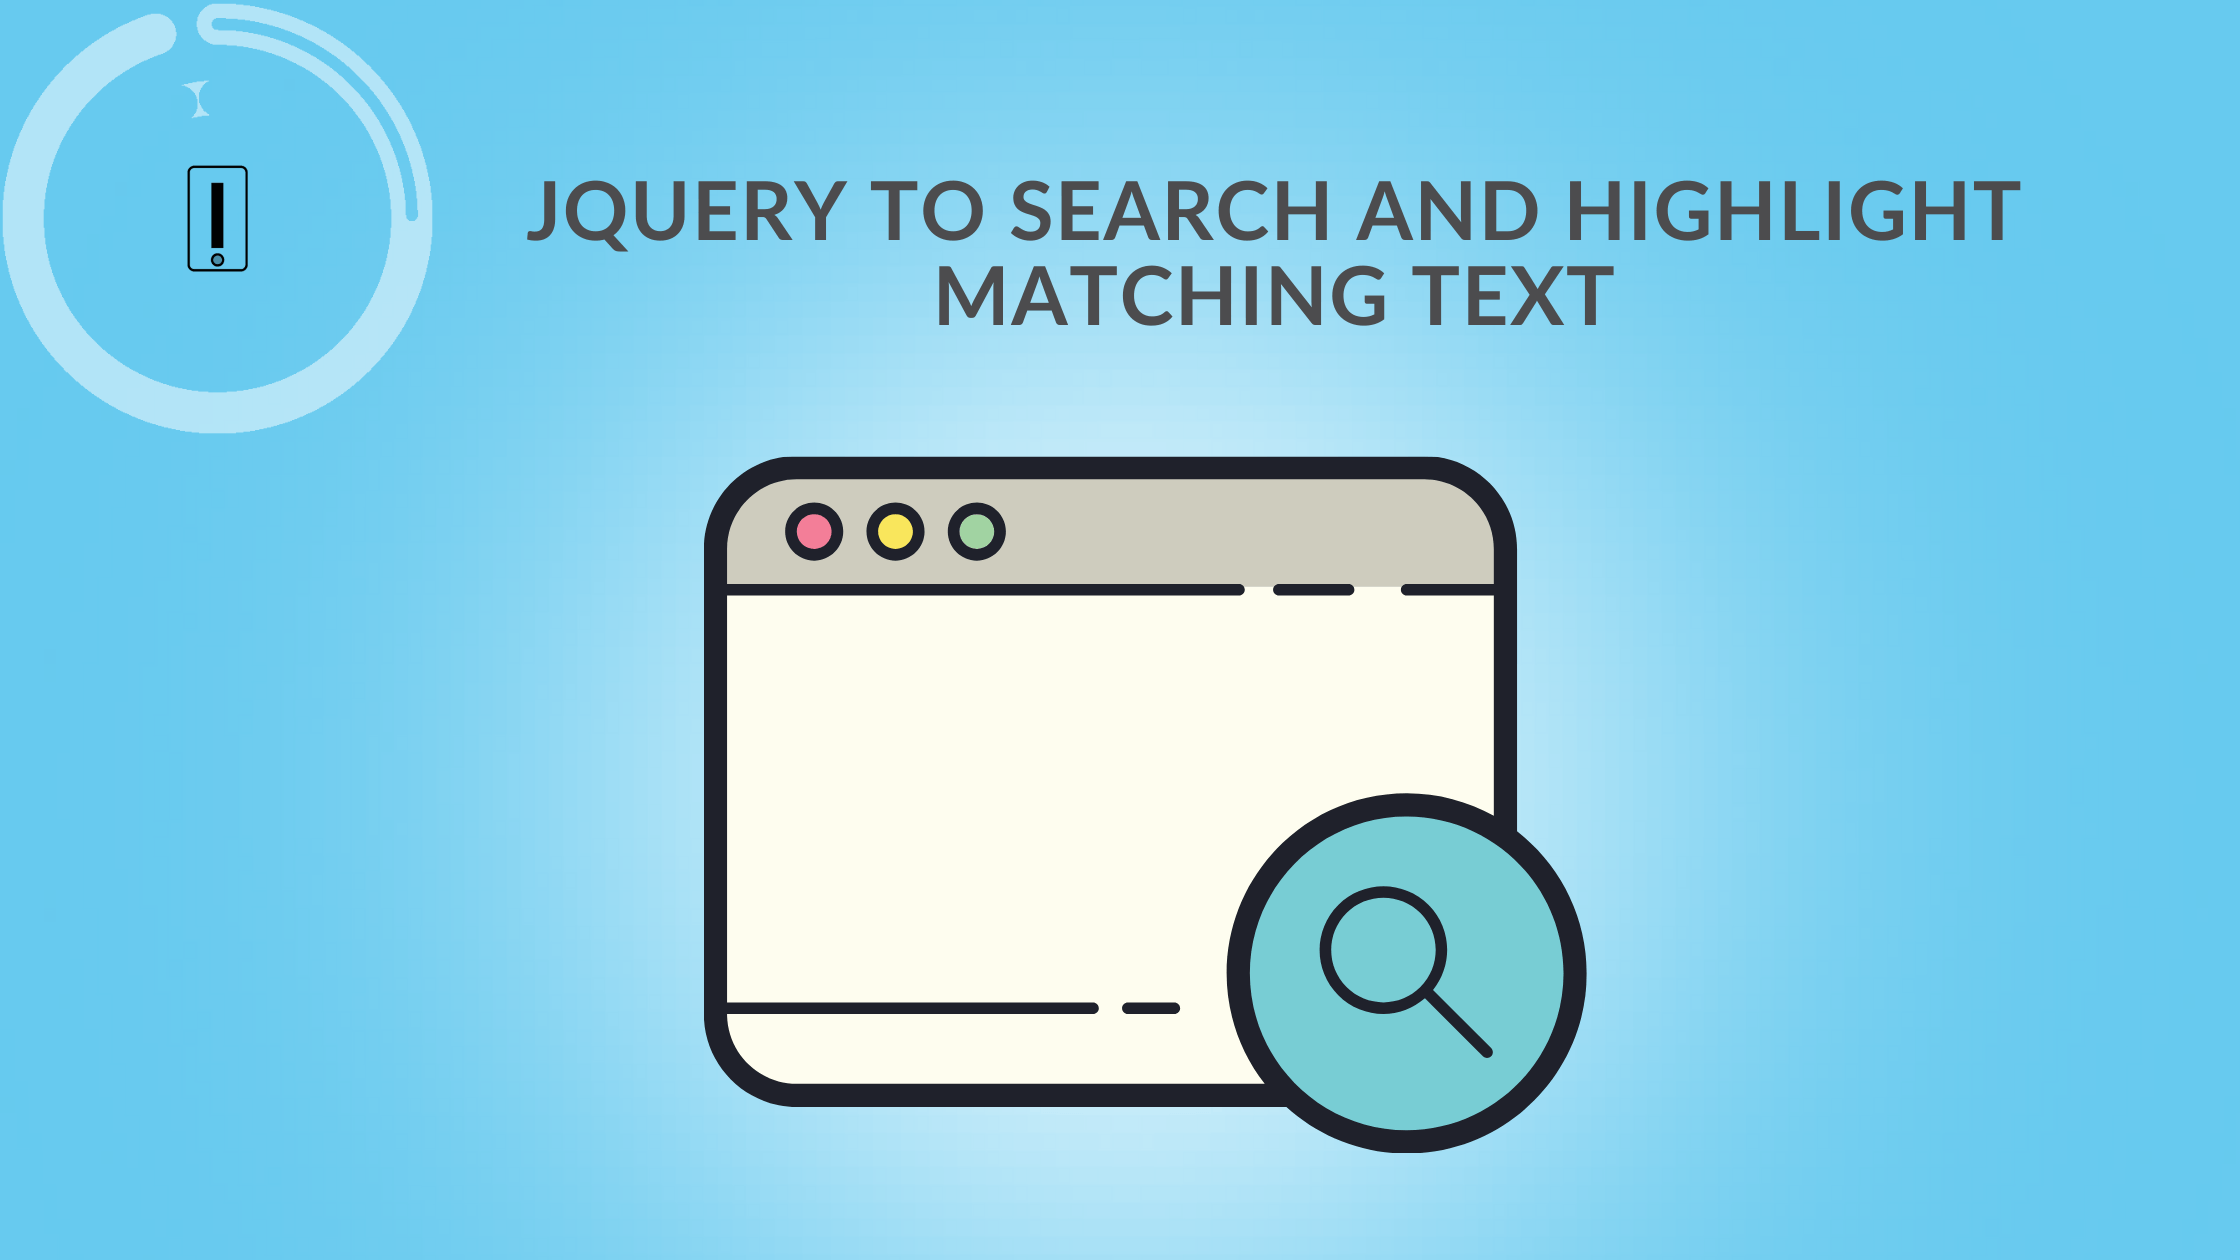 jQuery Highlight Text by Search and Match   infoandapps.com